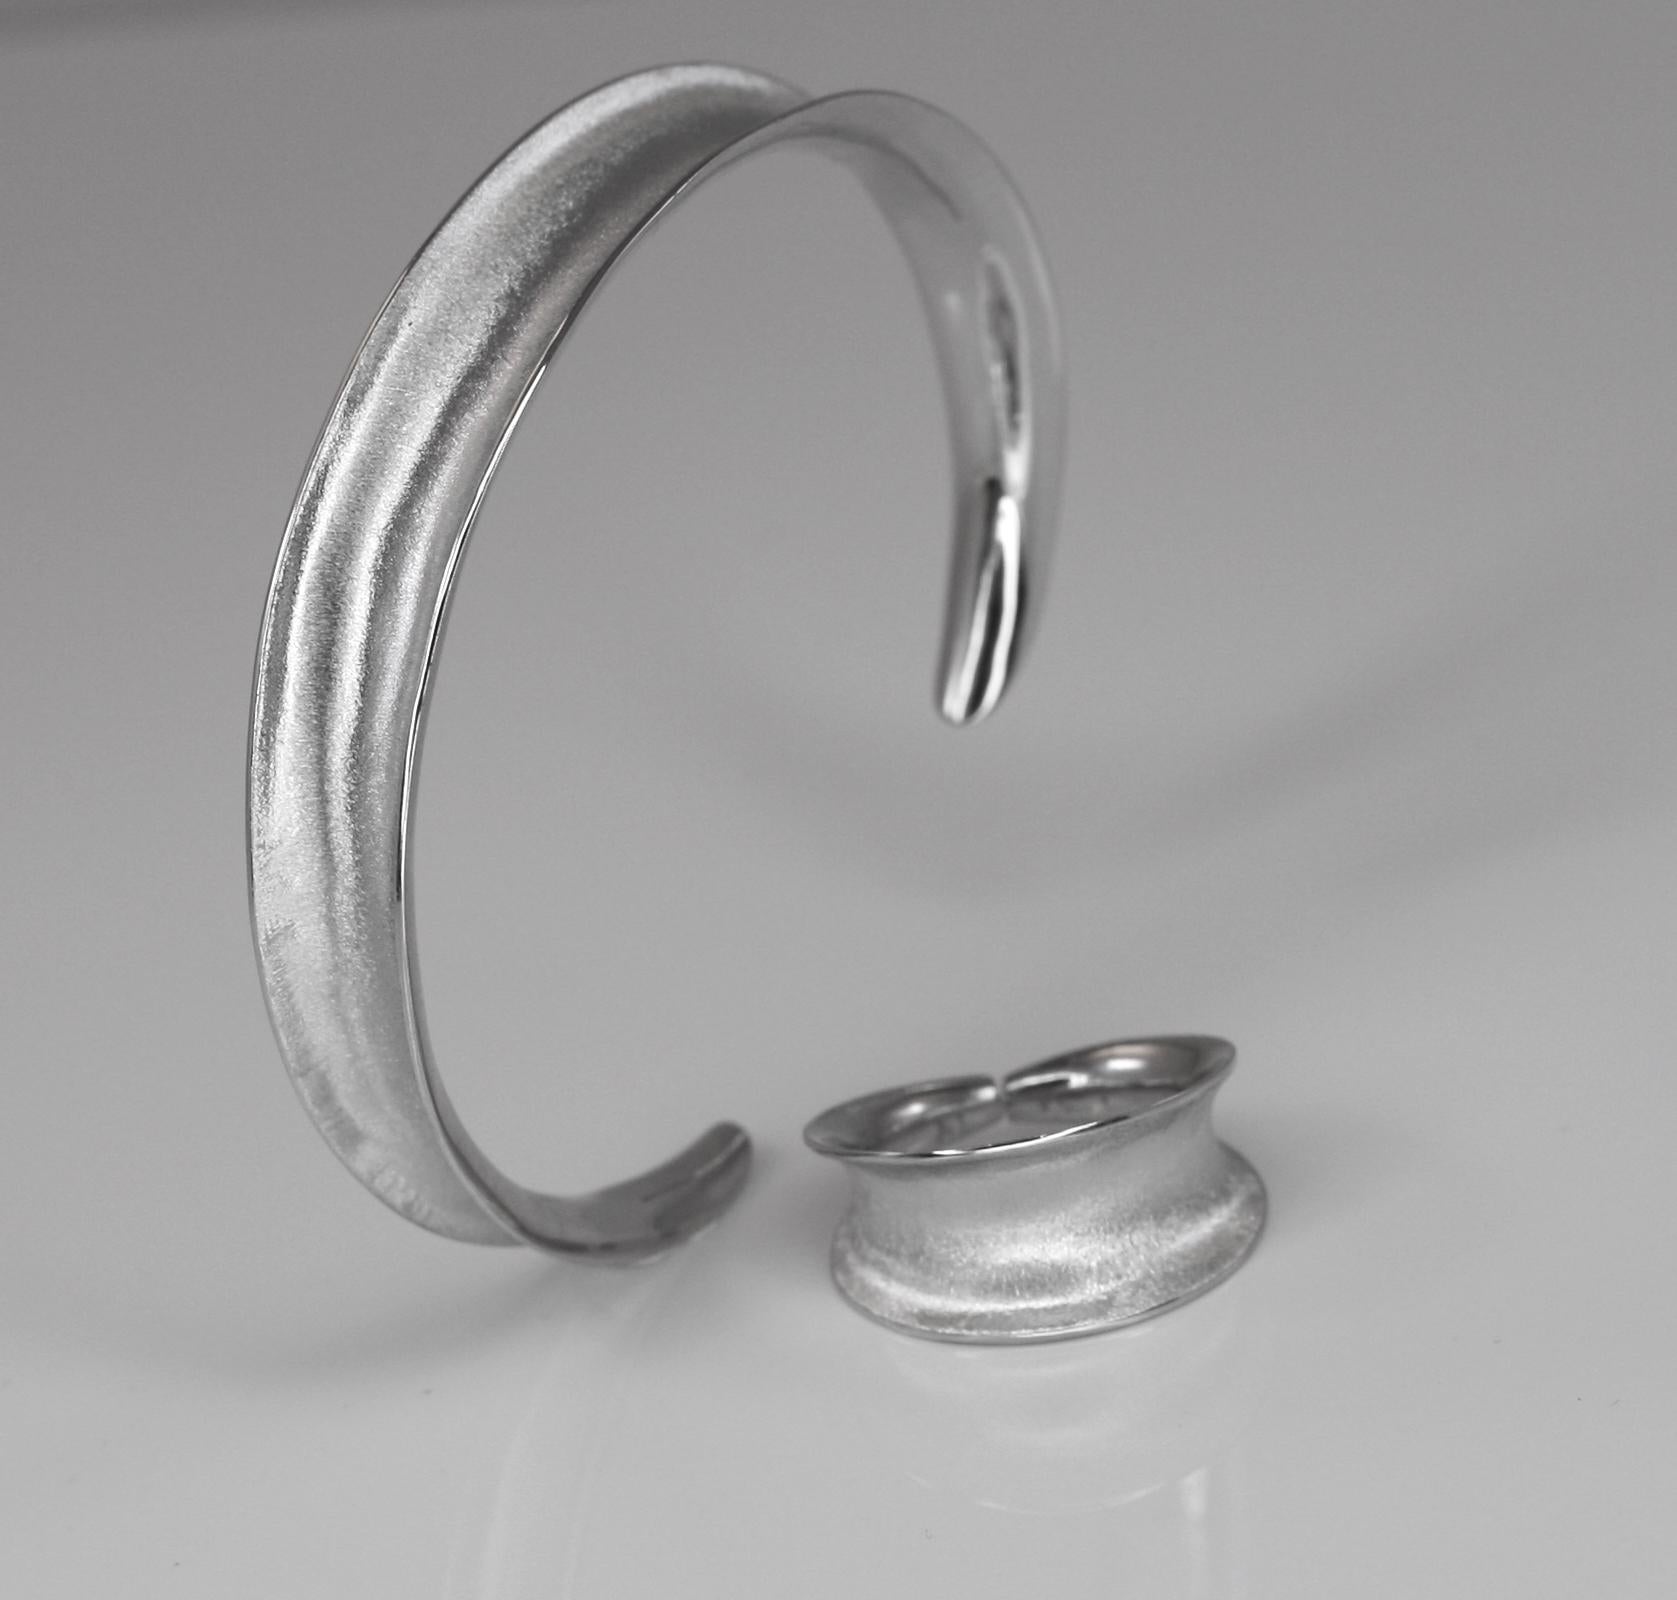 Yianni Creations Fine Silver and Palladium Bangle Bracelet For Sale 2